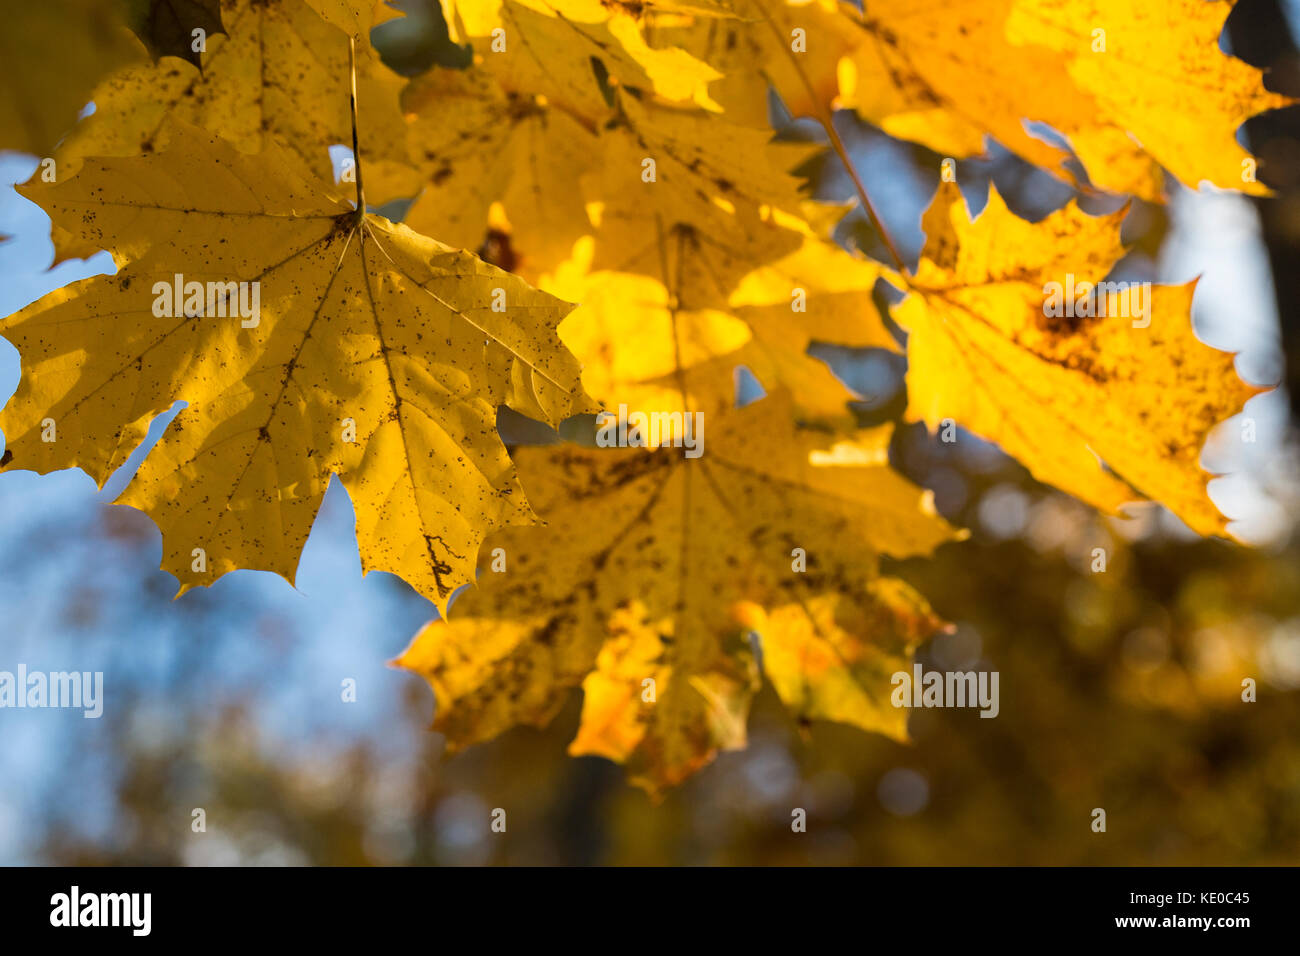 Autumn background with maple leaves in sunlightc Stock Photo